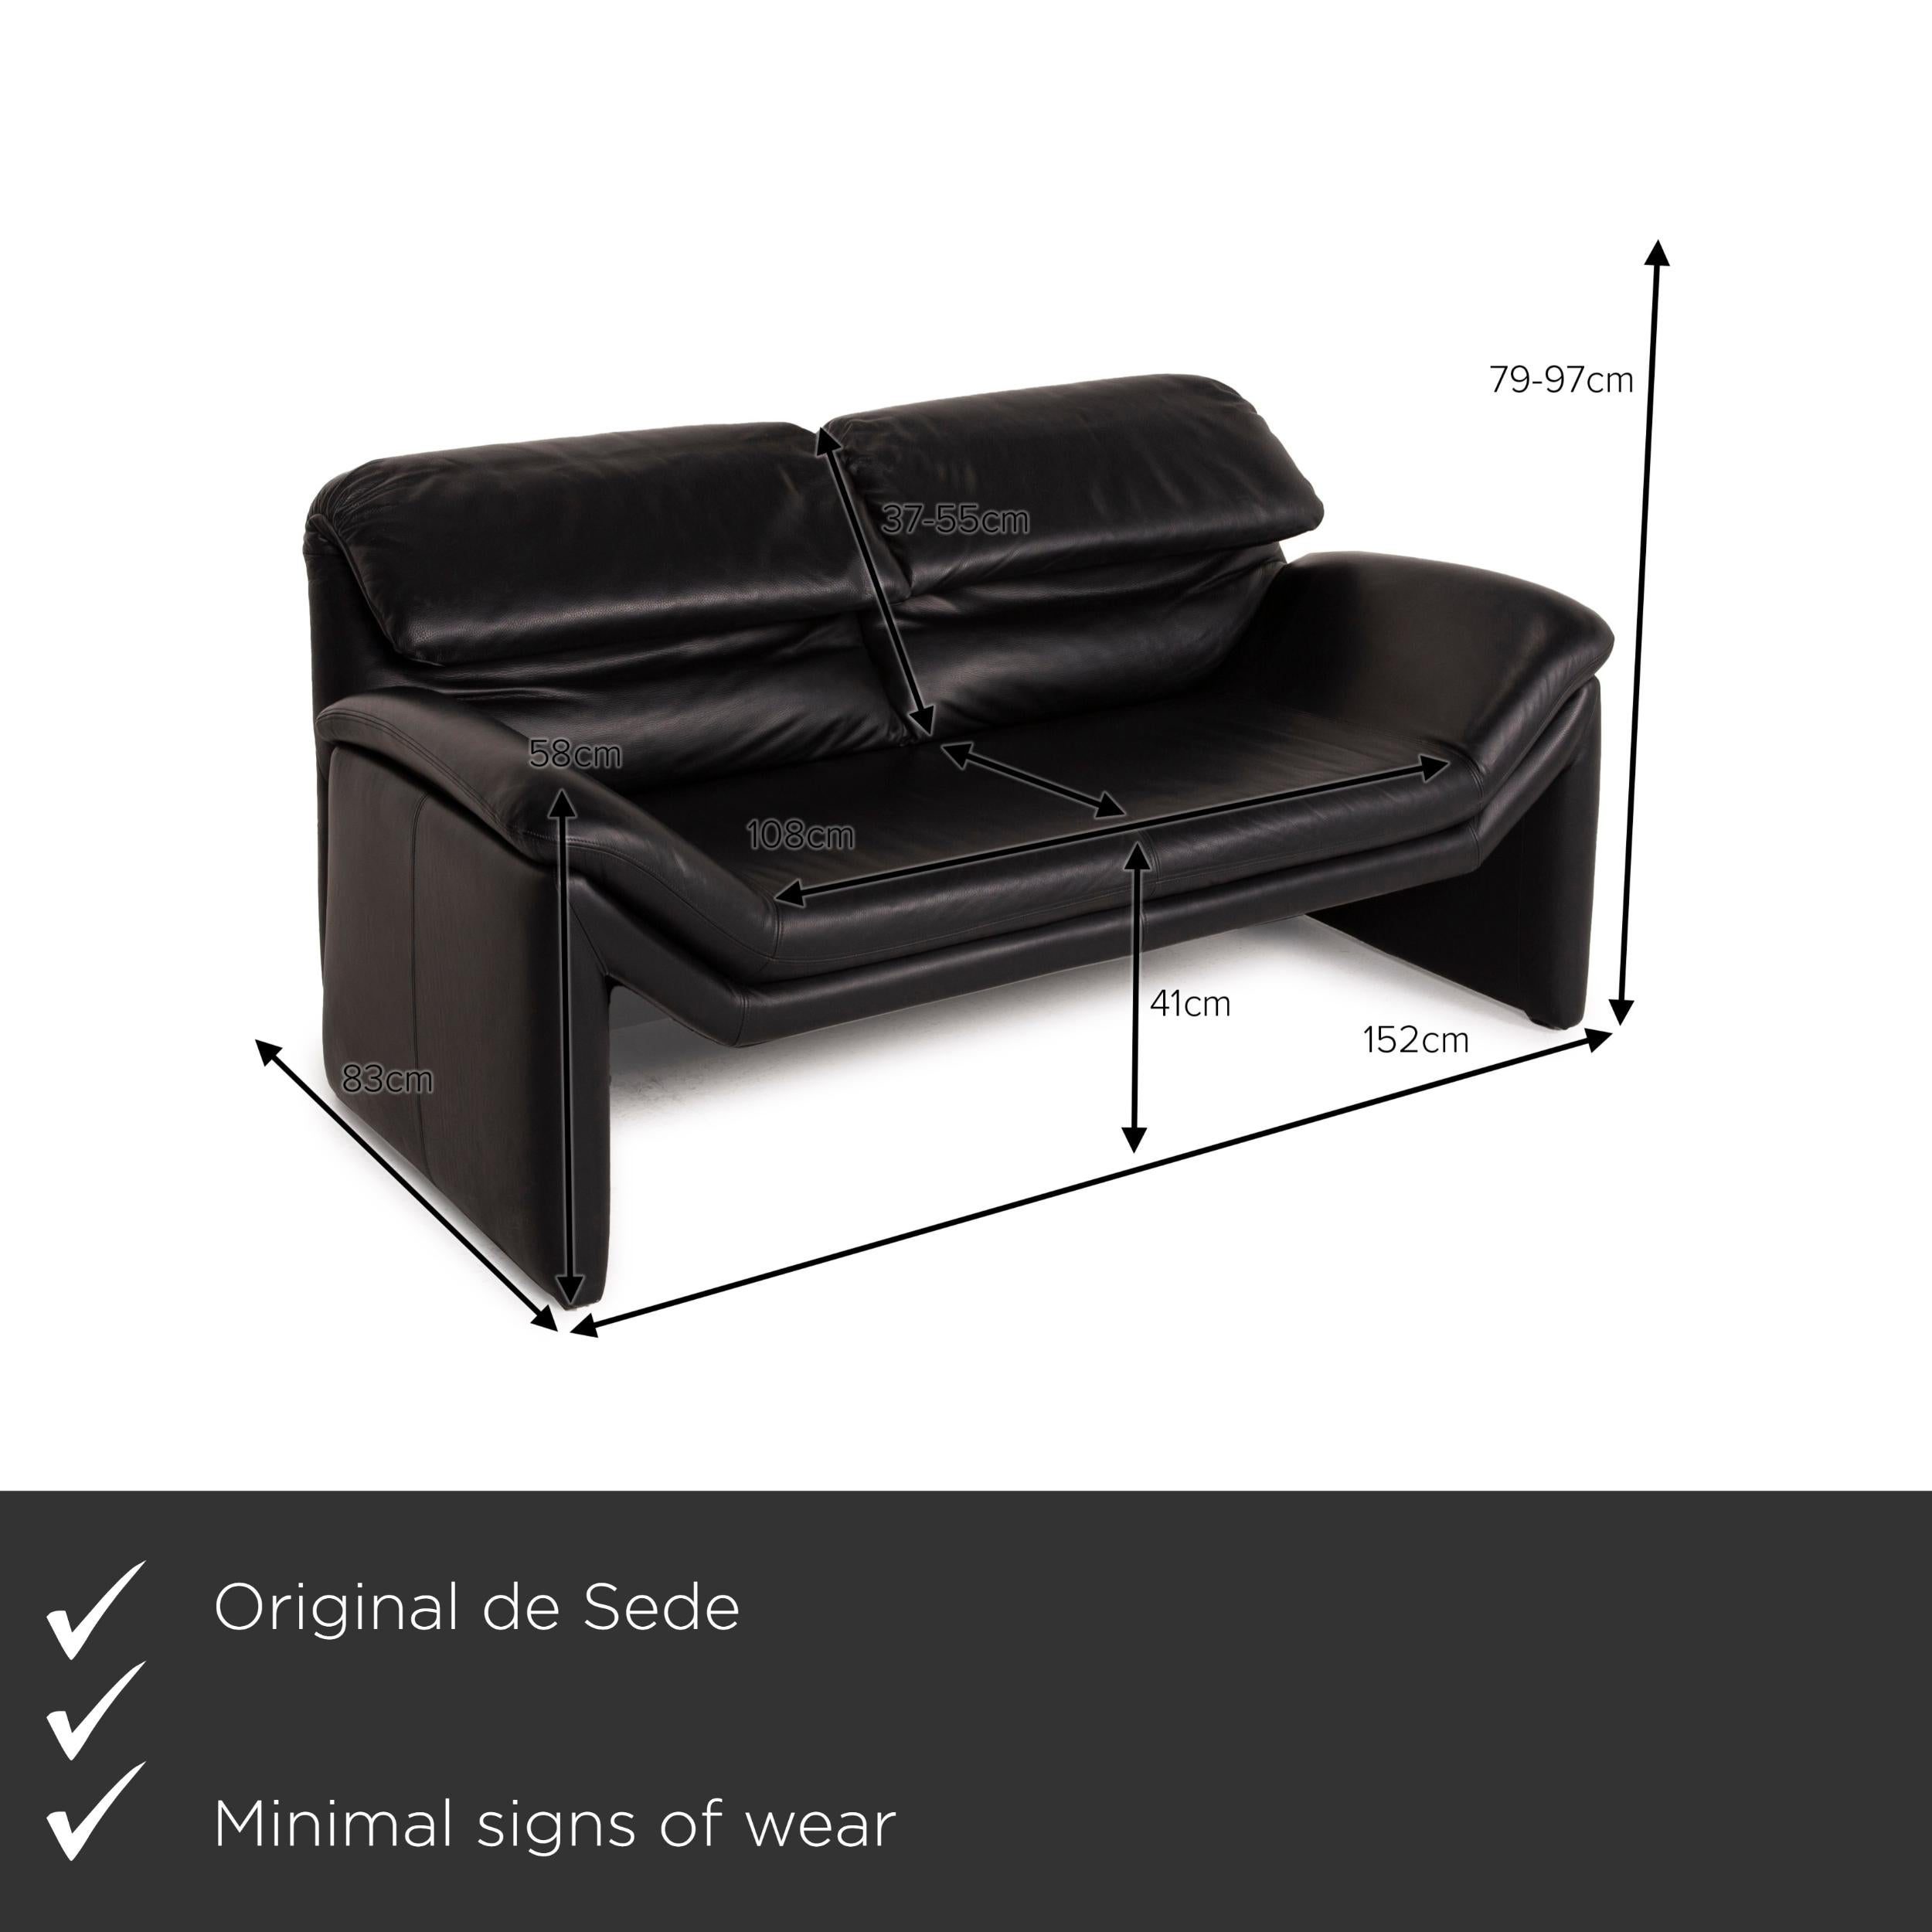 We present to you a de Sede Hans Kaufeld leather sofa black two-seater function.

Product measurements in centimeters:

Depth 83
Width 152
Height 76
Seat height 41
Rest height 58
Seat depth 52
Seat width 108
Back height 37.
 
 
  